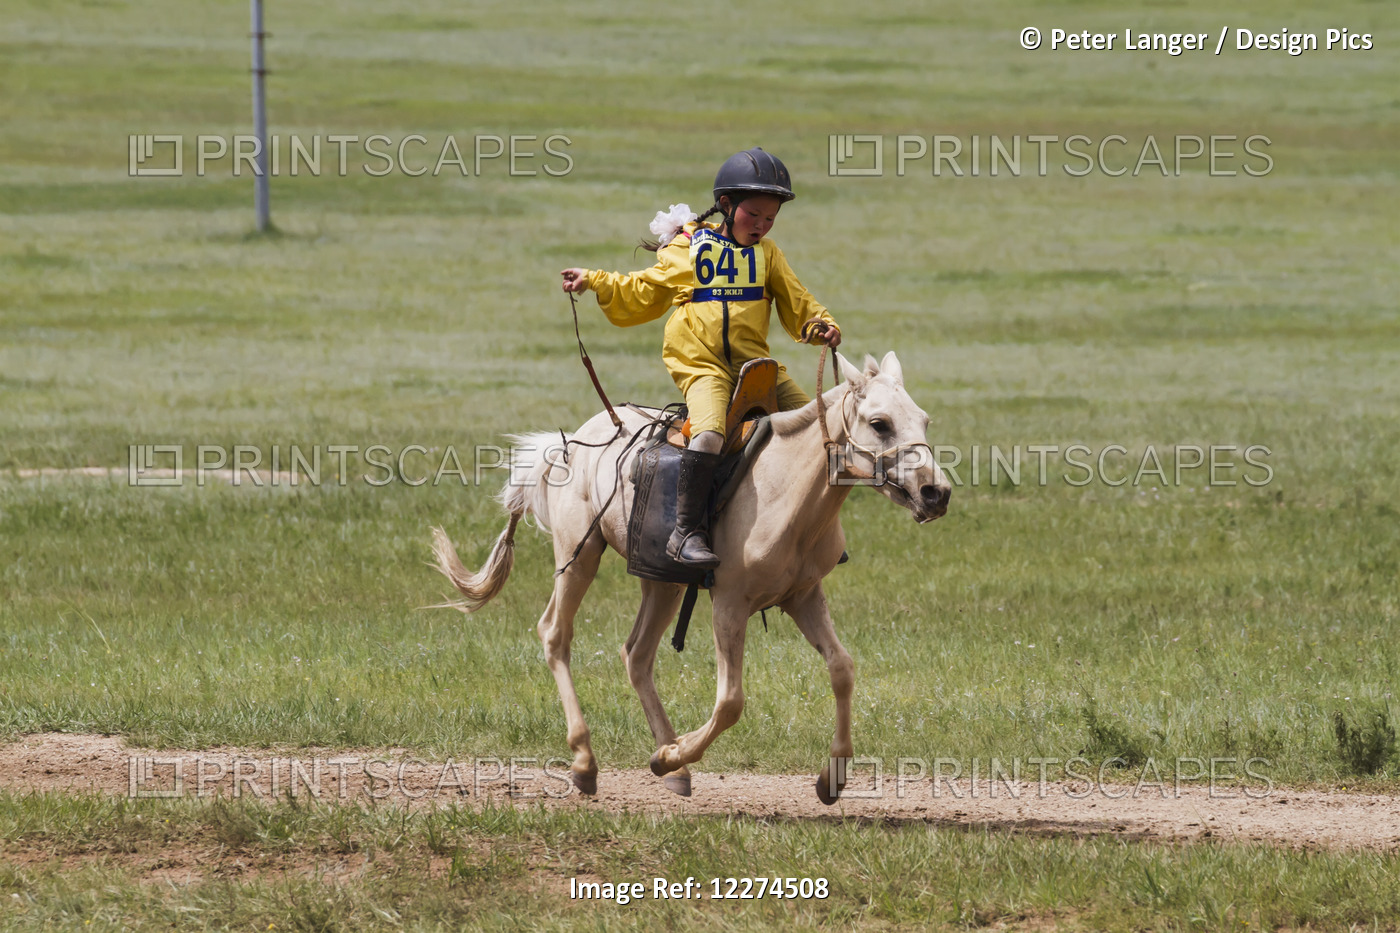 Boy Racing A Horse In The Daaga (Two-Year Old) Horse Race Held During The 2014 ...